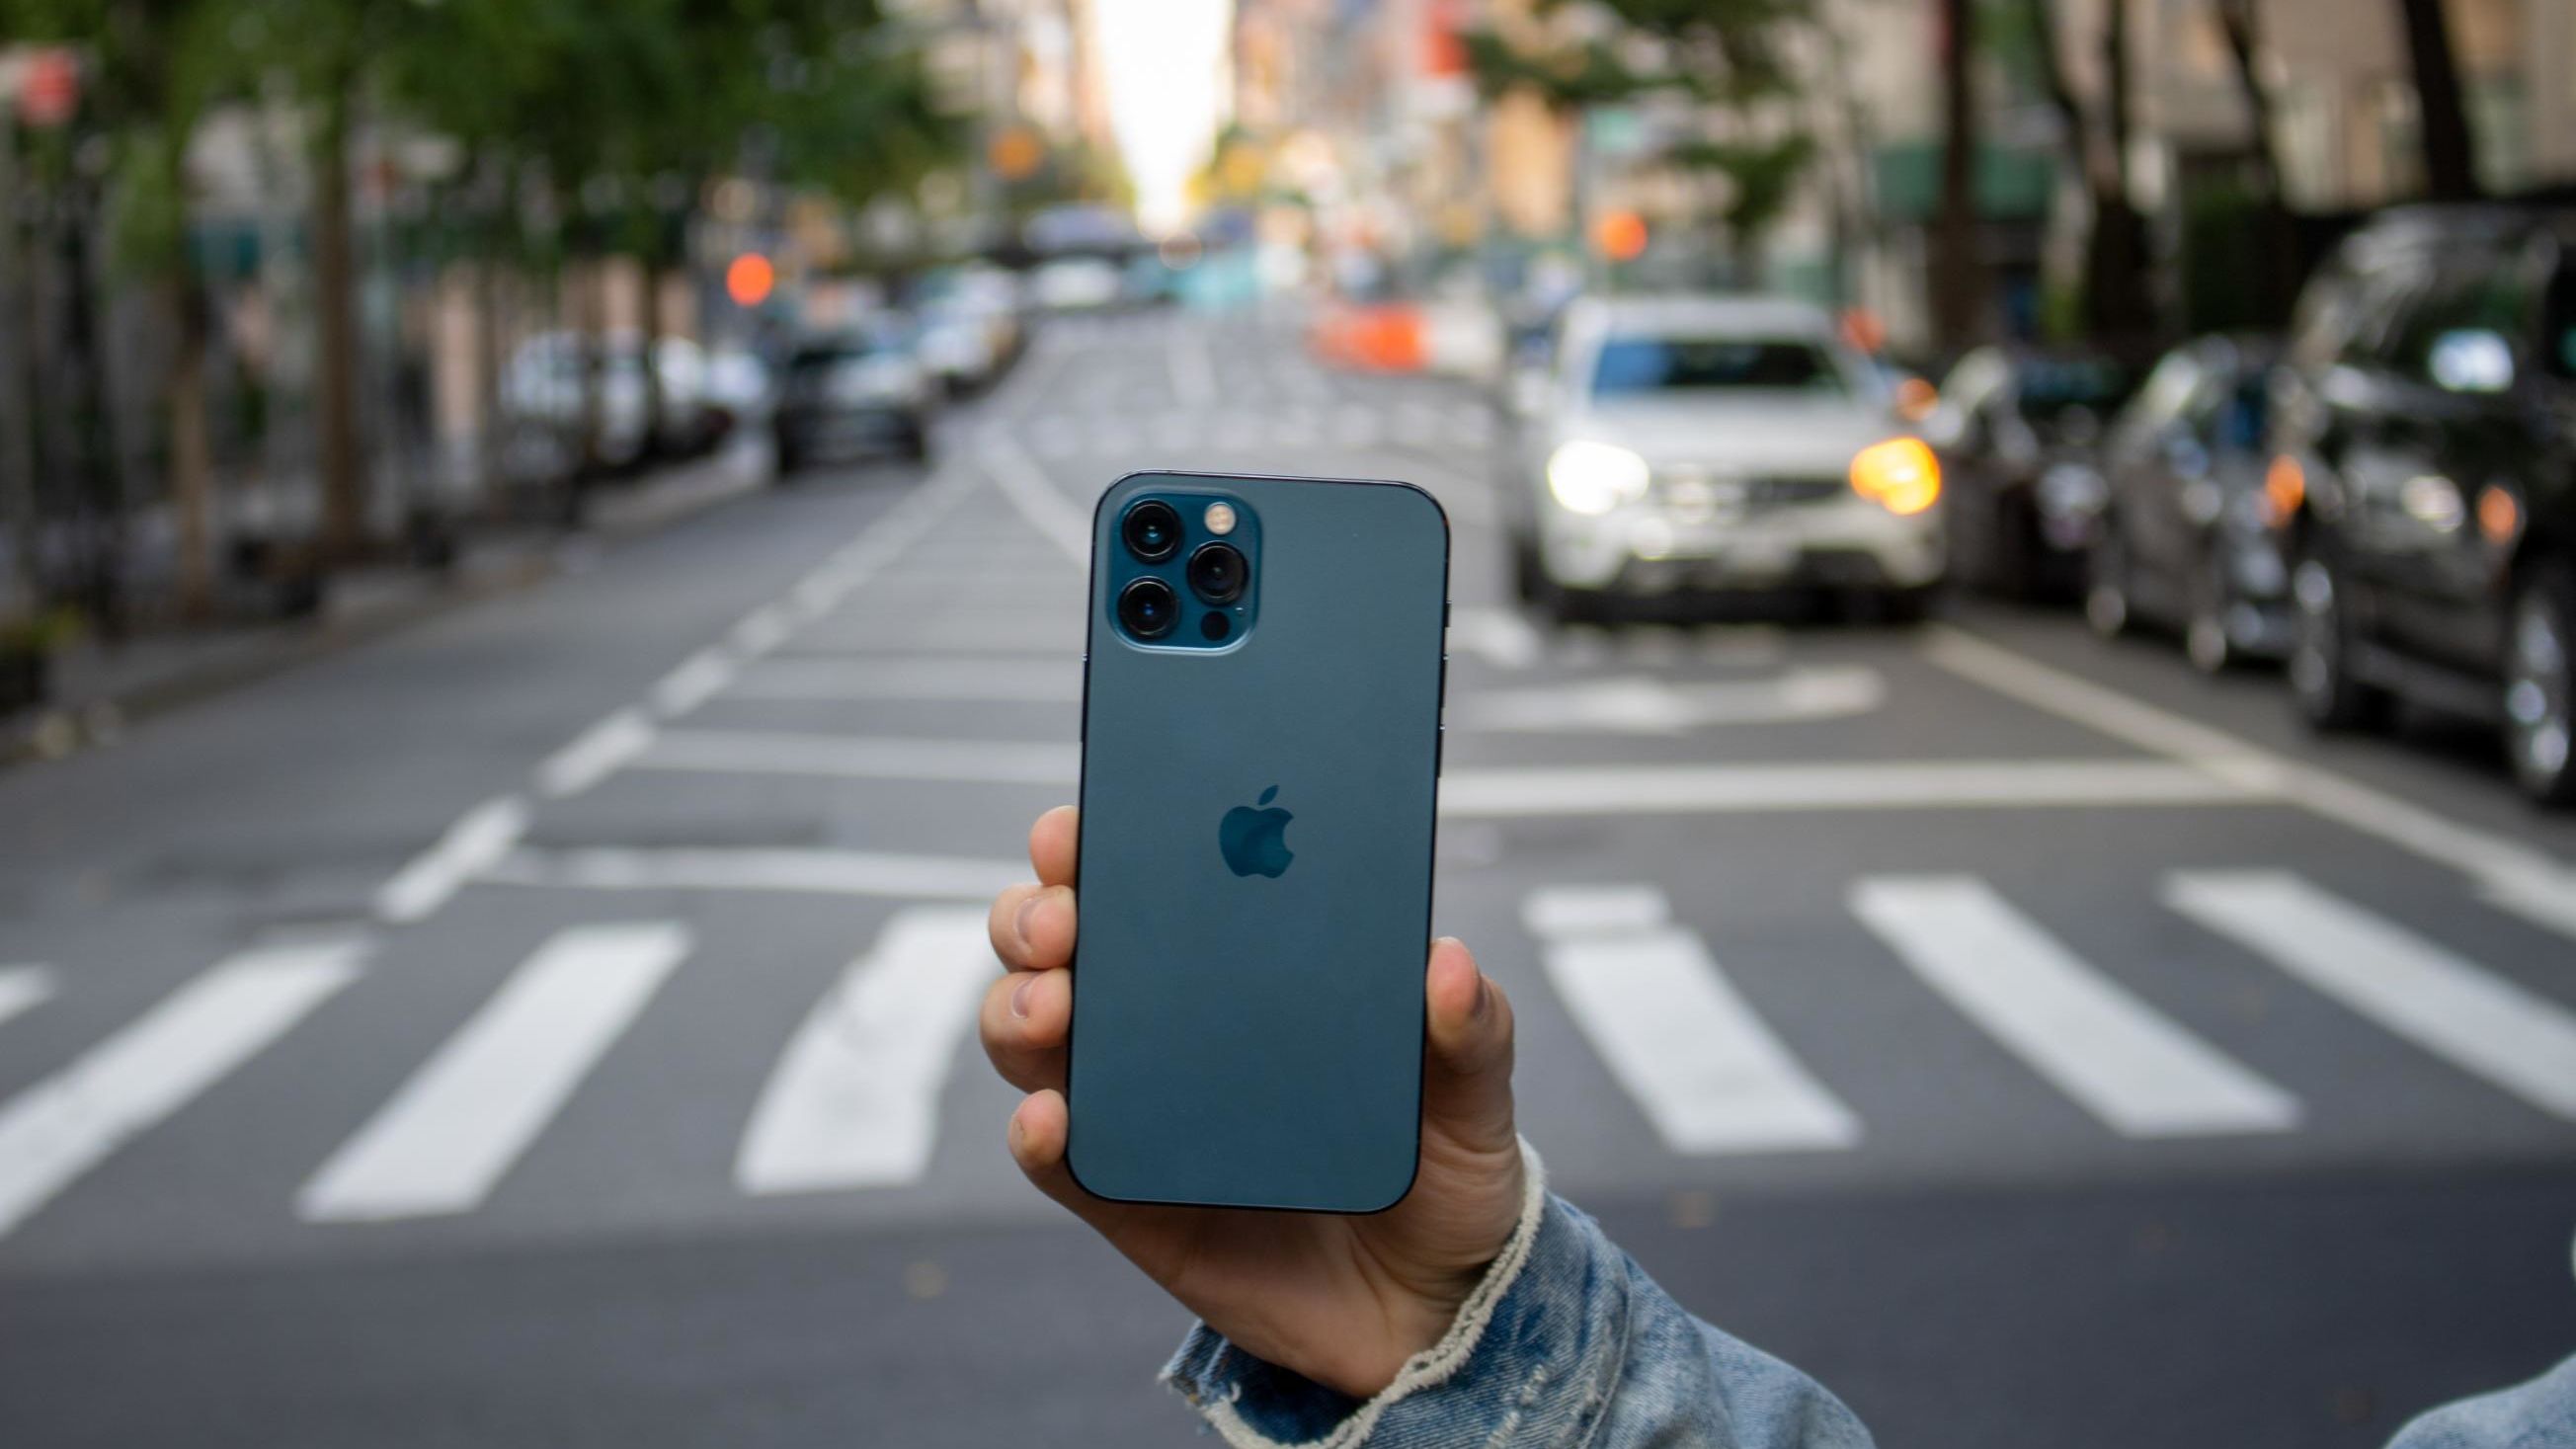 iPhone 12 and iPhone 12 Pro review: Massive upgrade in every regard